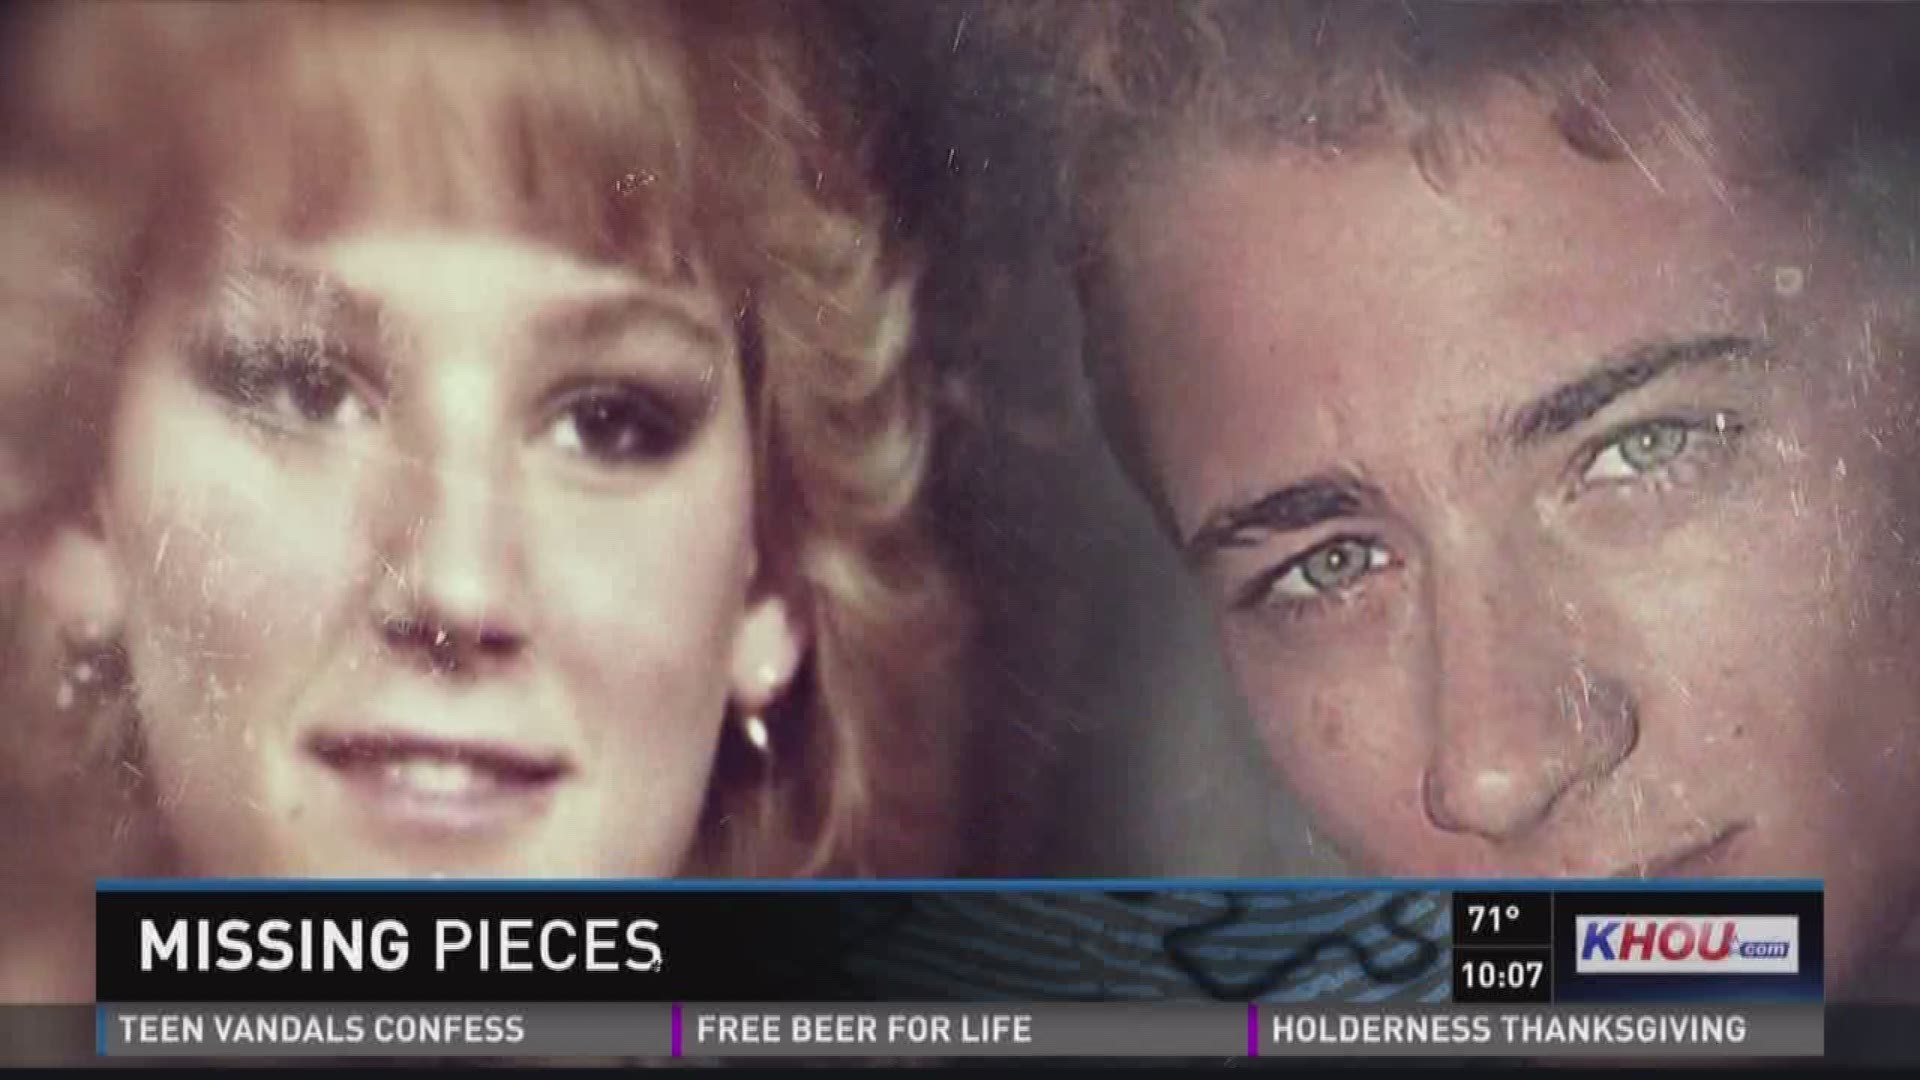 Cold case detectives are trying a relatively new DNA approach to the notorious Lovers Lane murders, a case that became one of Houston's most infamous unsolved slayings.